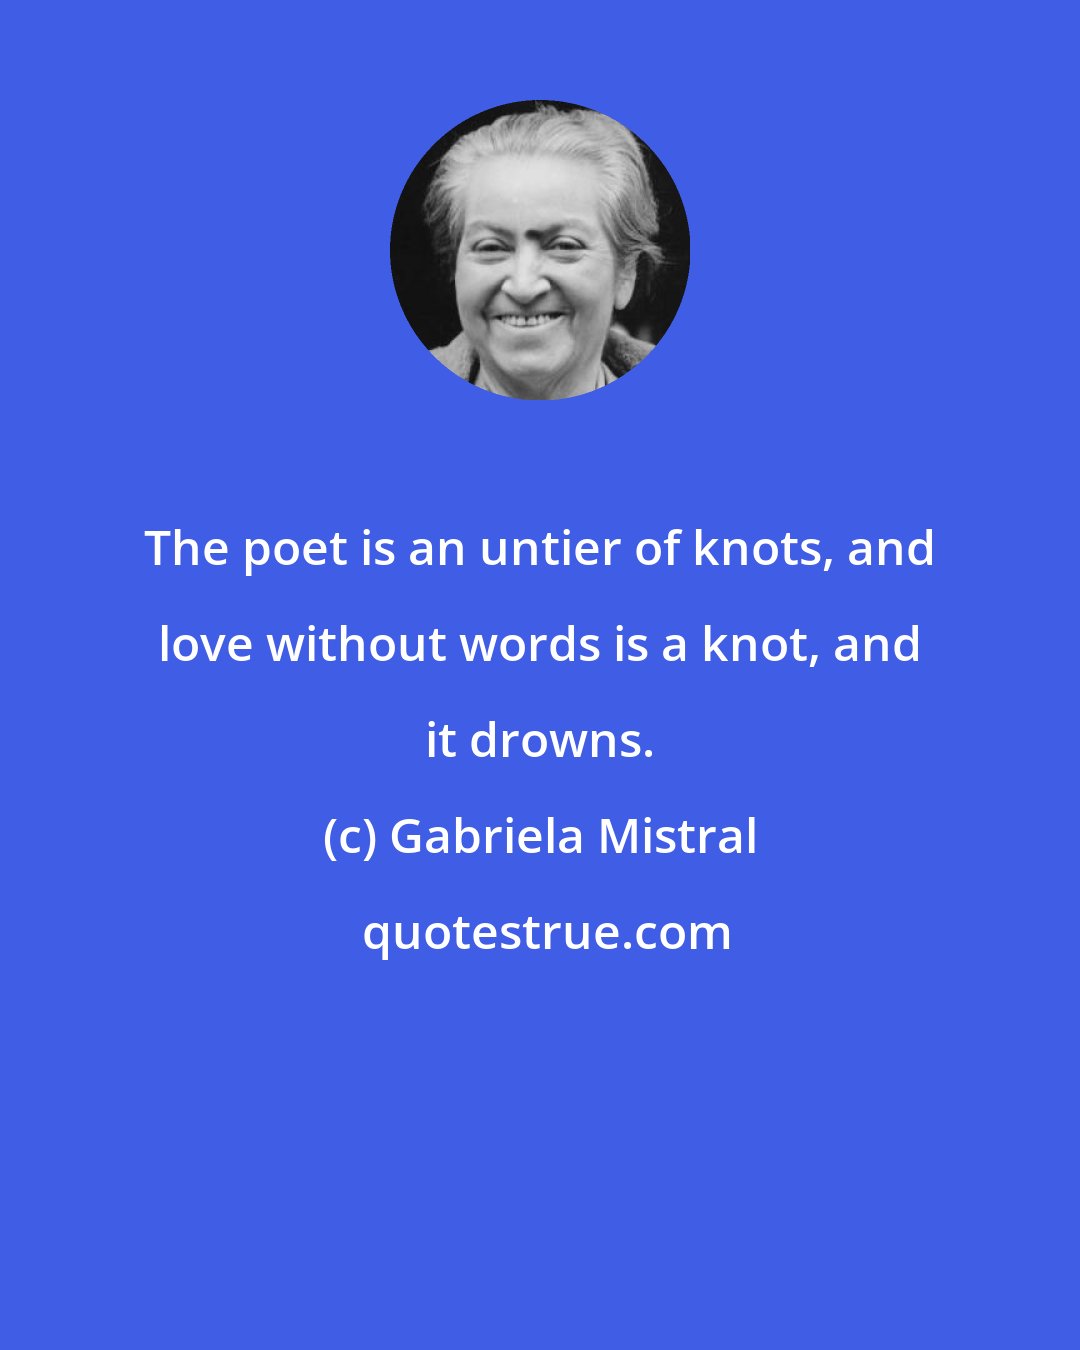 Gabriela Mistral: The poet is an untier of knots, and love without words is a knot, and it drowns.